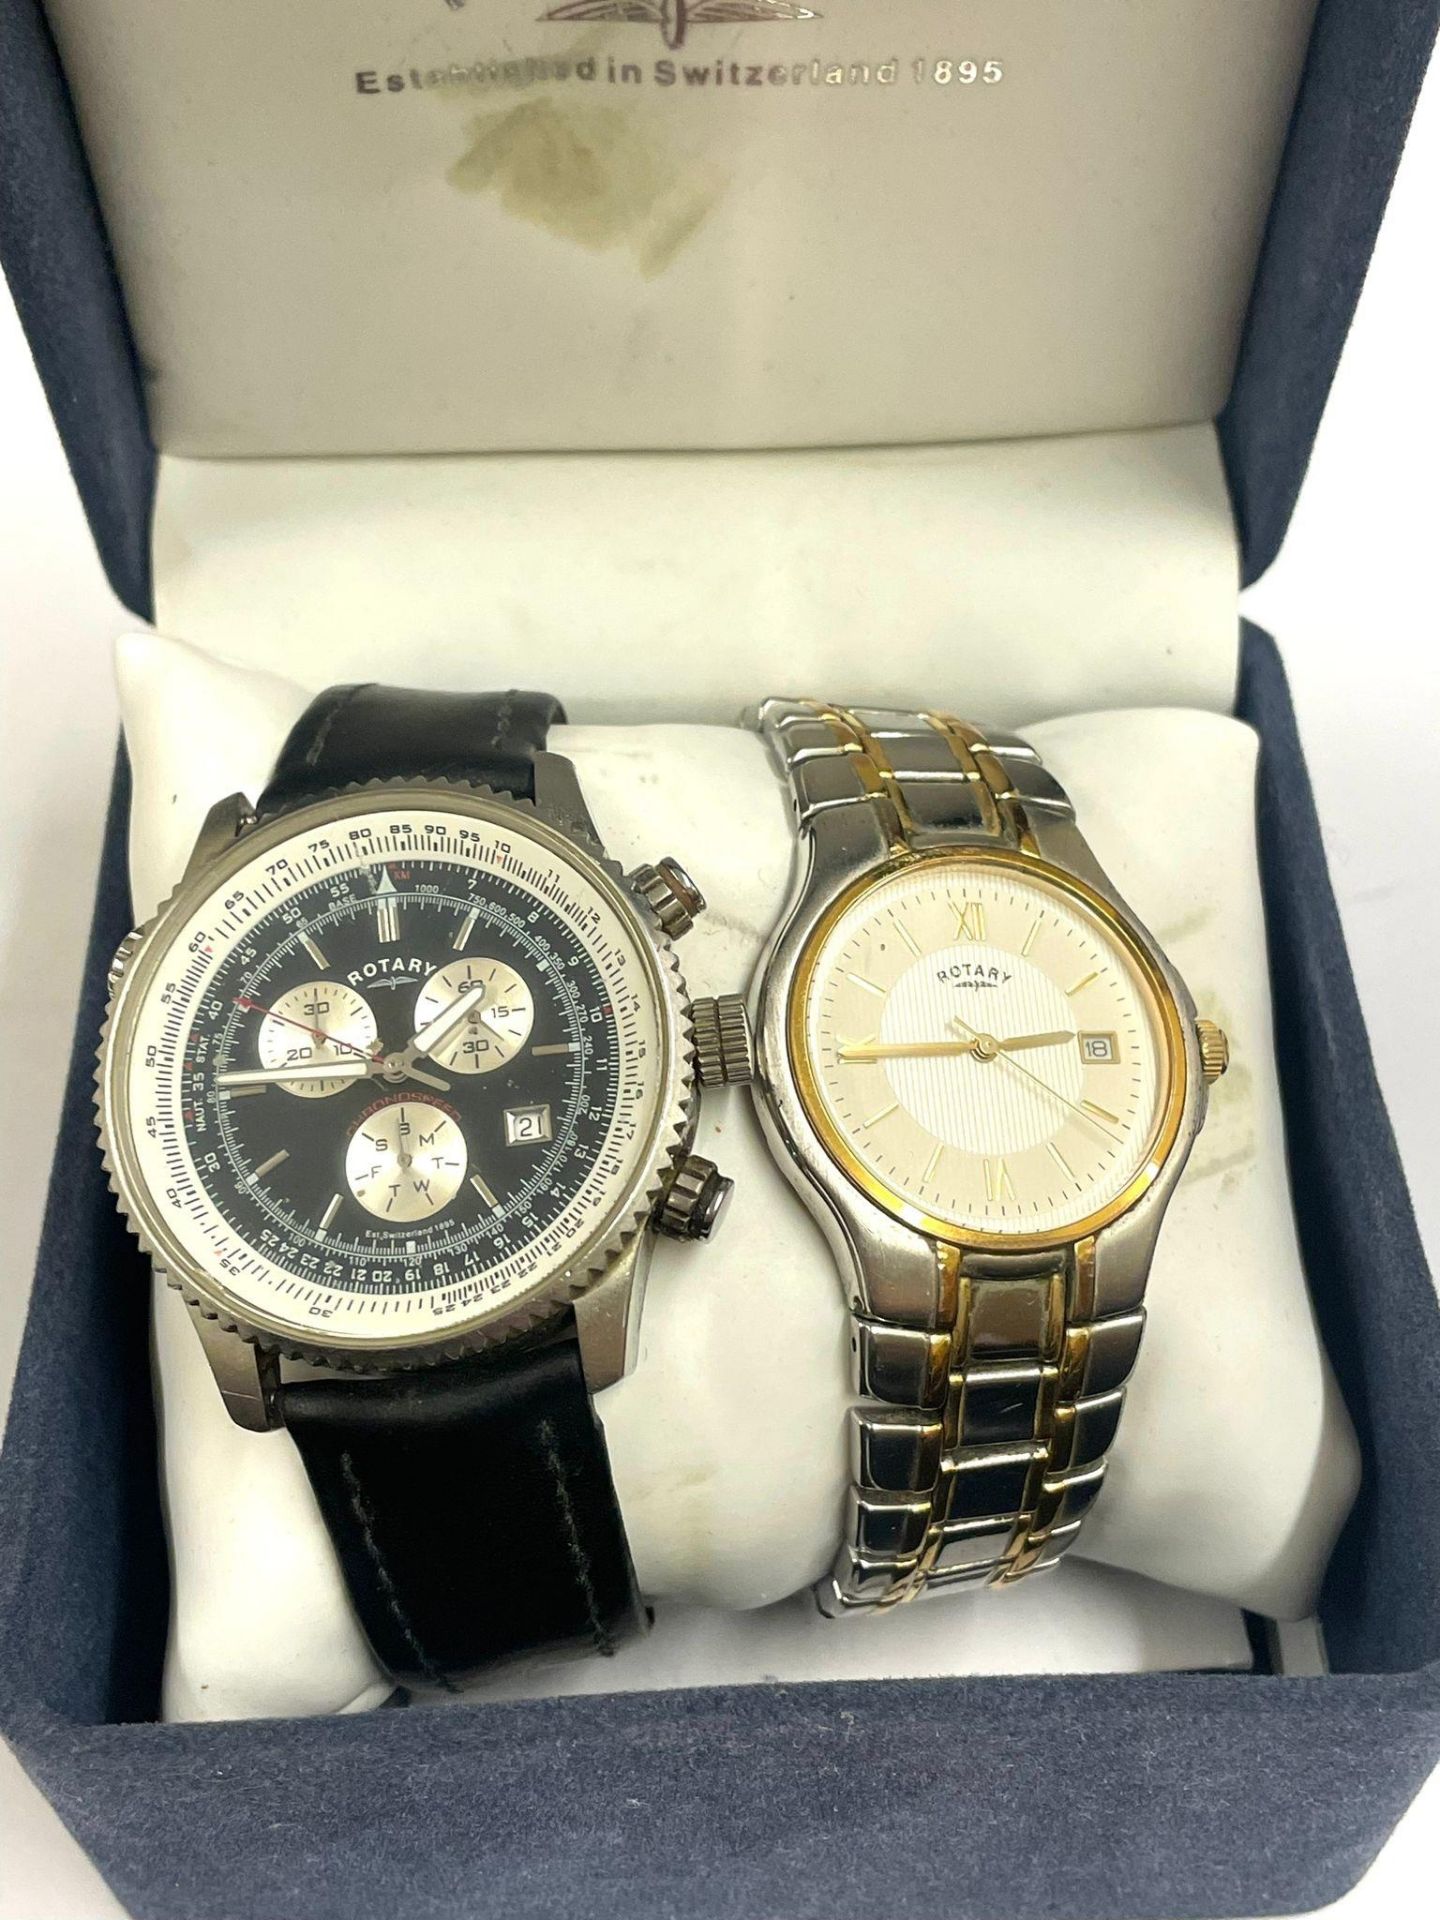 2x Gents rotary watches